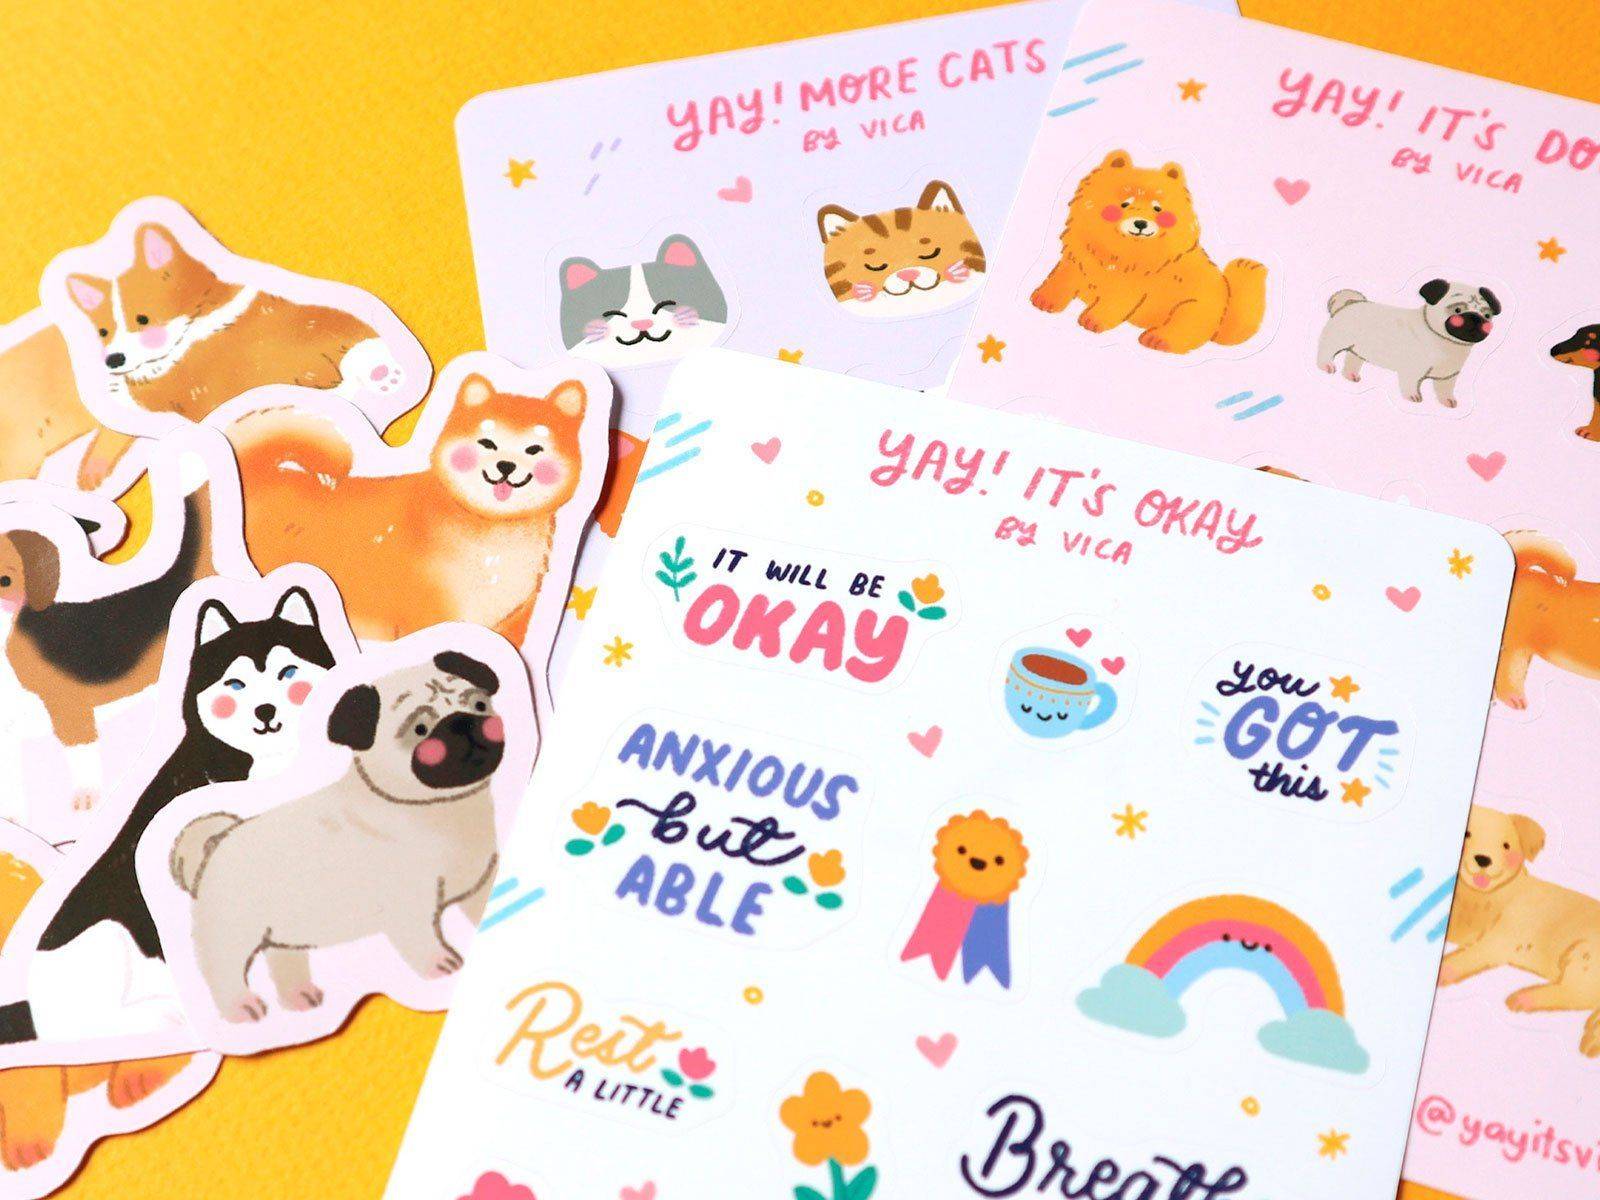 How To Turn Drawings Into Stickers + Free Sticker Selling Class